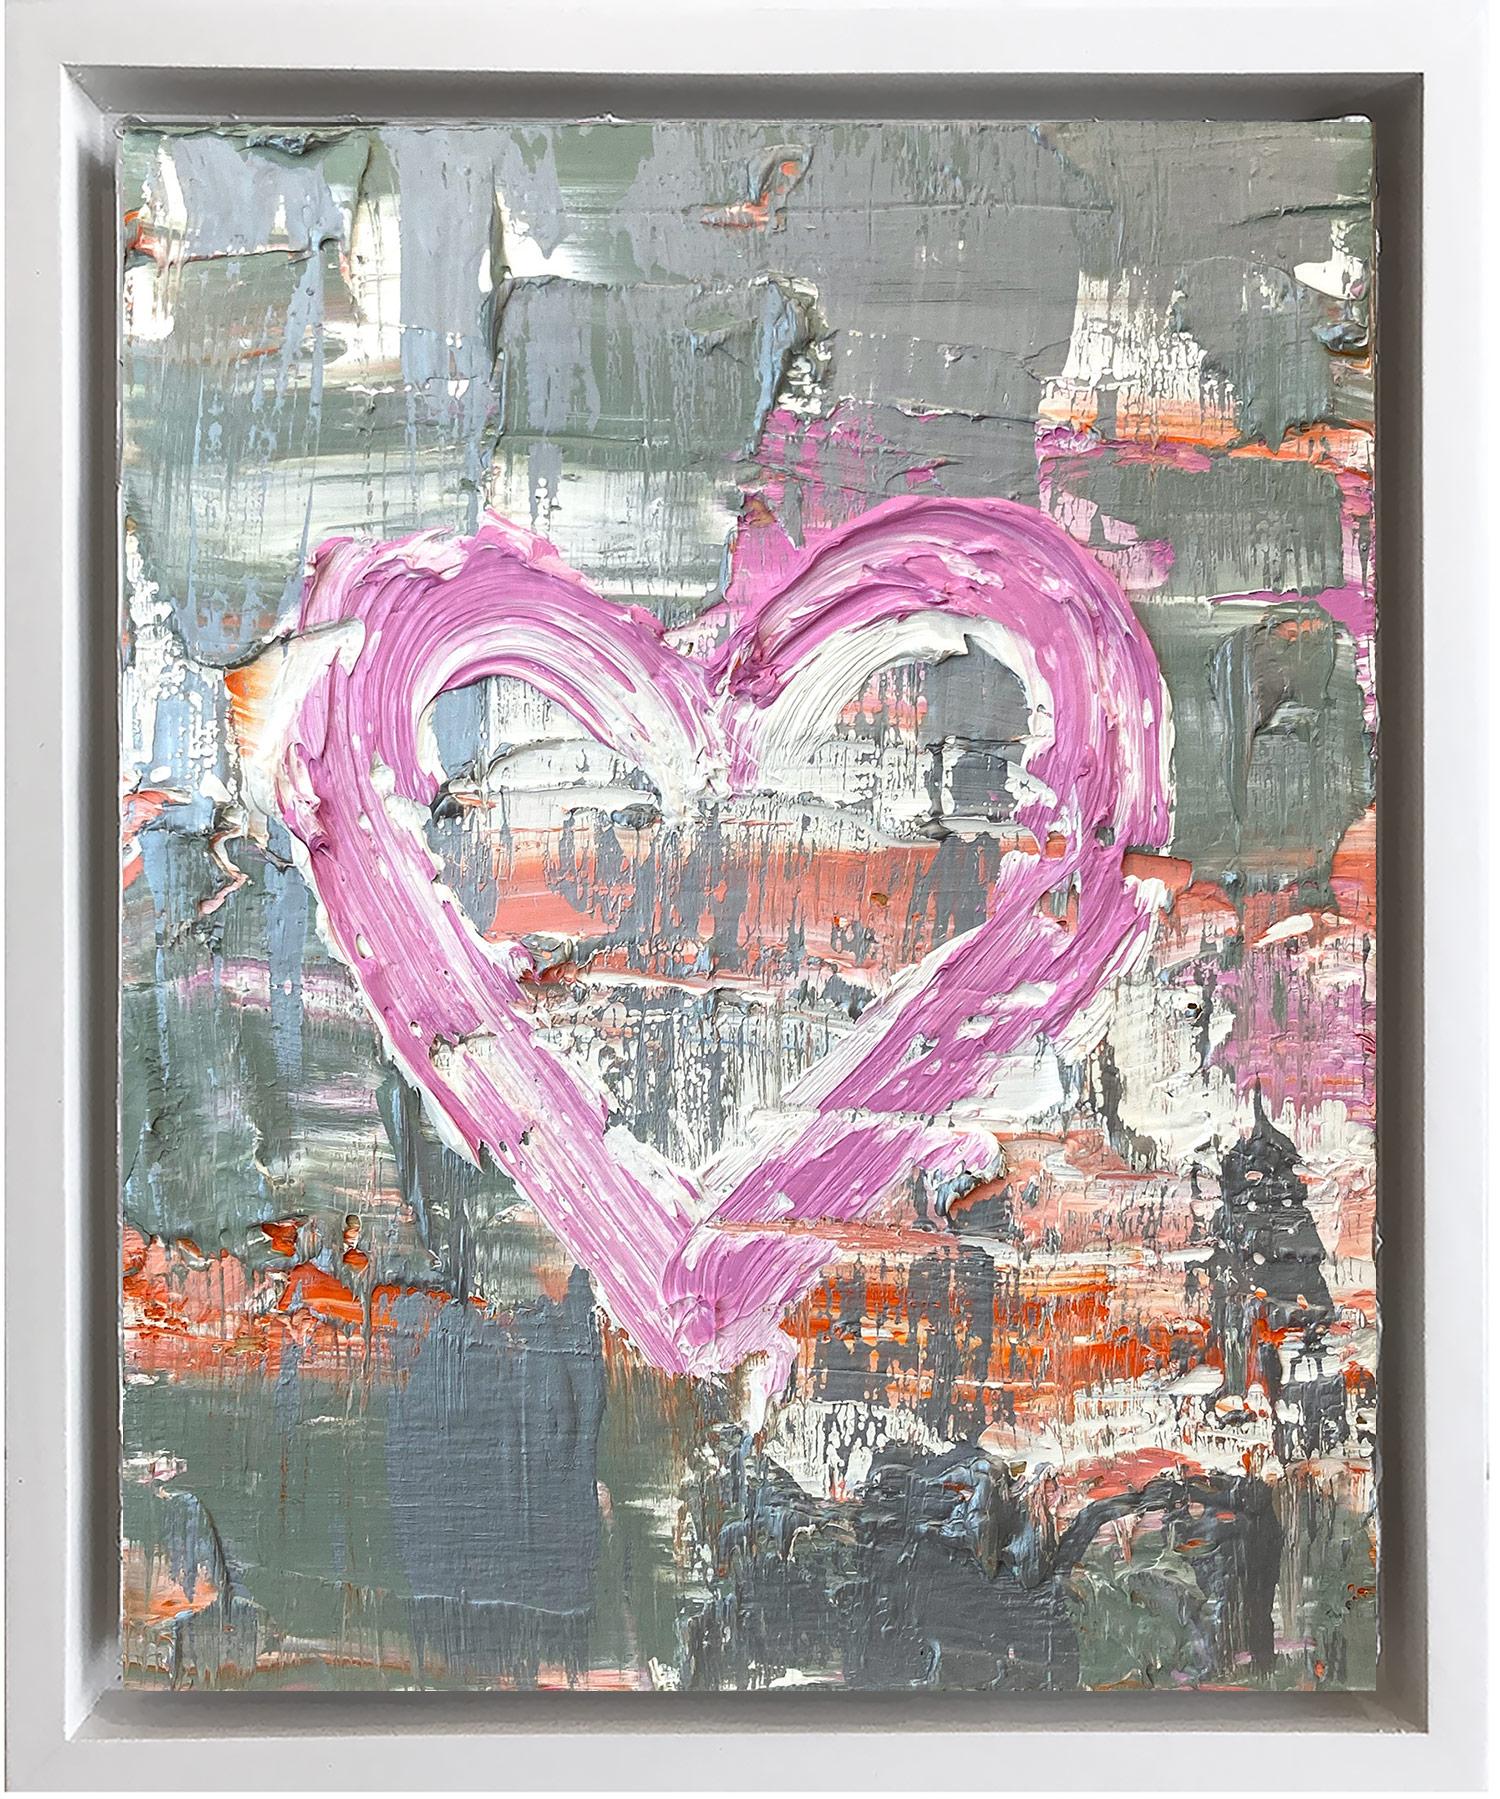 Cindy Shaoul Figurative Painting - "My Mod Heart" Pink, Orange, Silver Contemporary Oil Painting w Floater Frame 